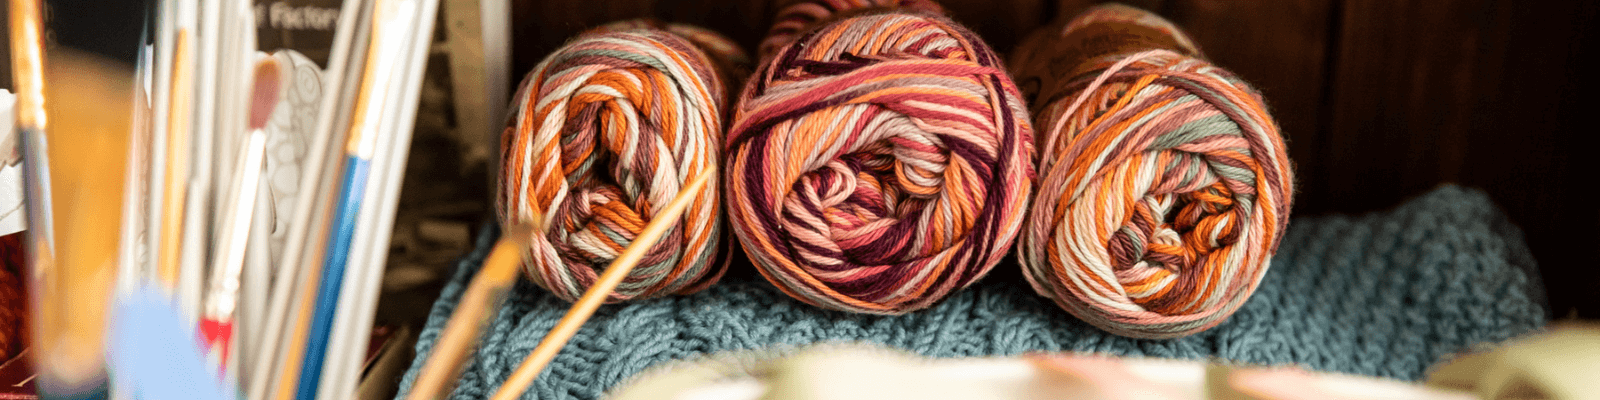 https://www.airfield.ie/wp-content/uploads/2021/04/Knitting-at-Airfield-Estate-close-up-of-wool-1.png